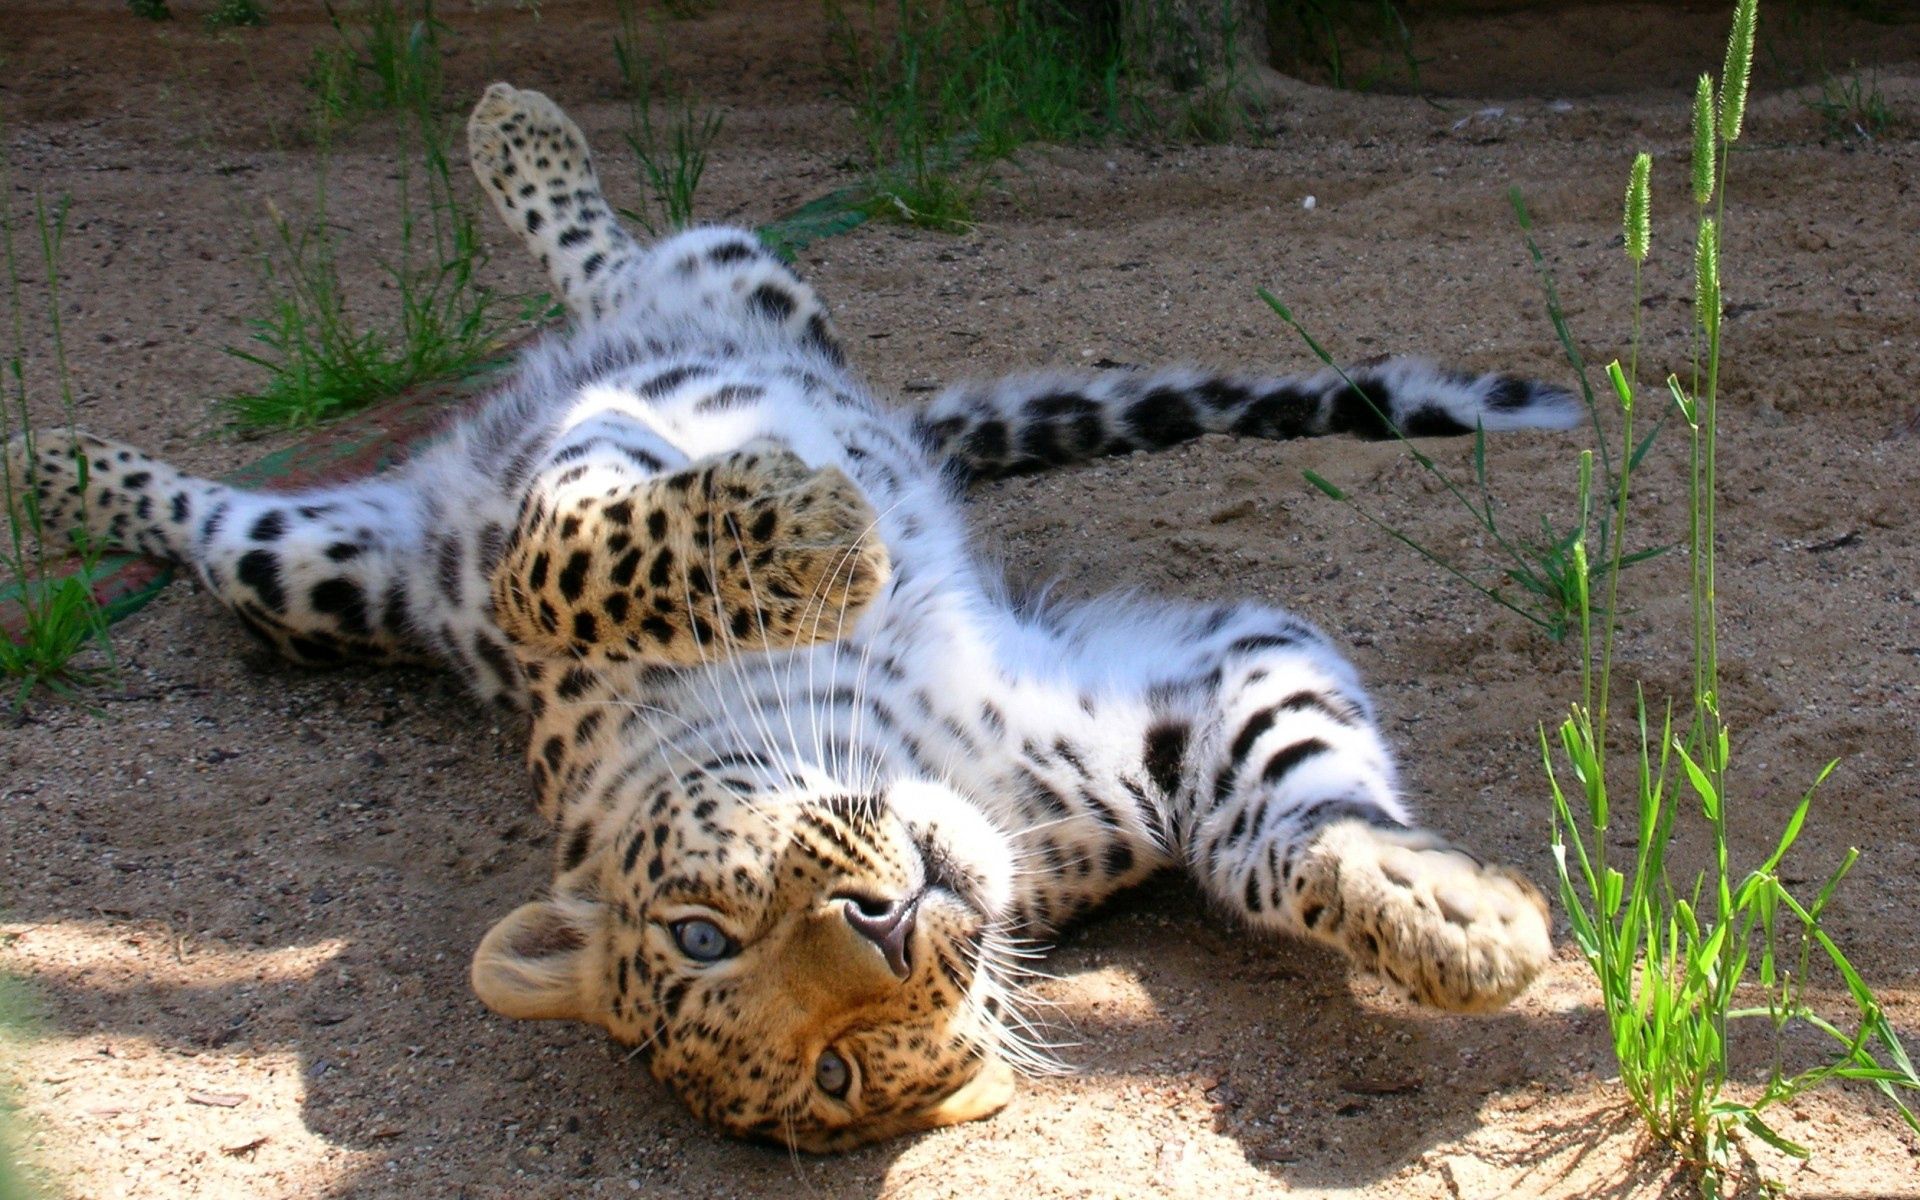 joey, leopard, animals, young, playful, tumble, somersault